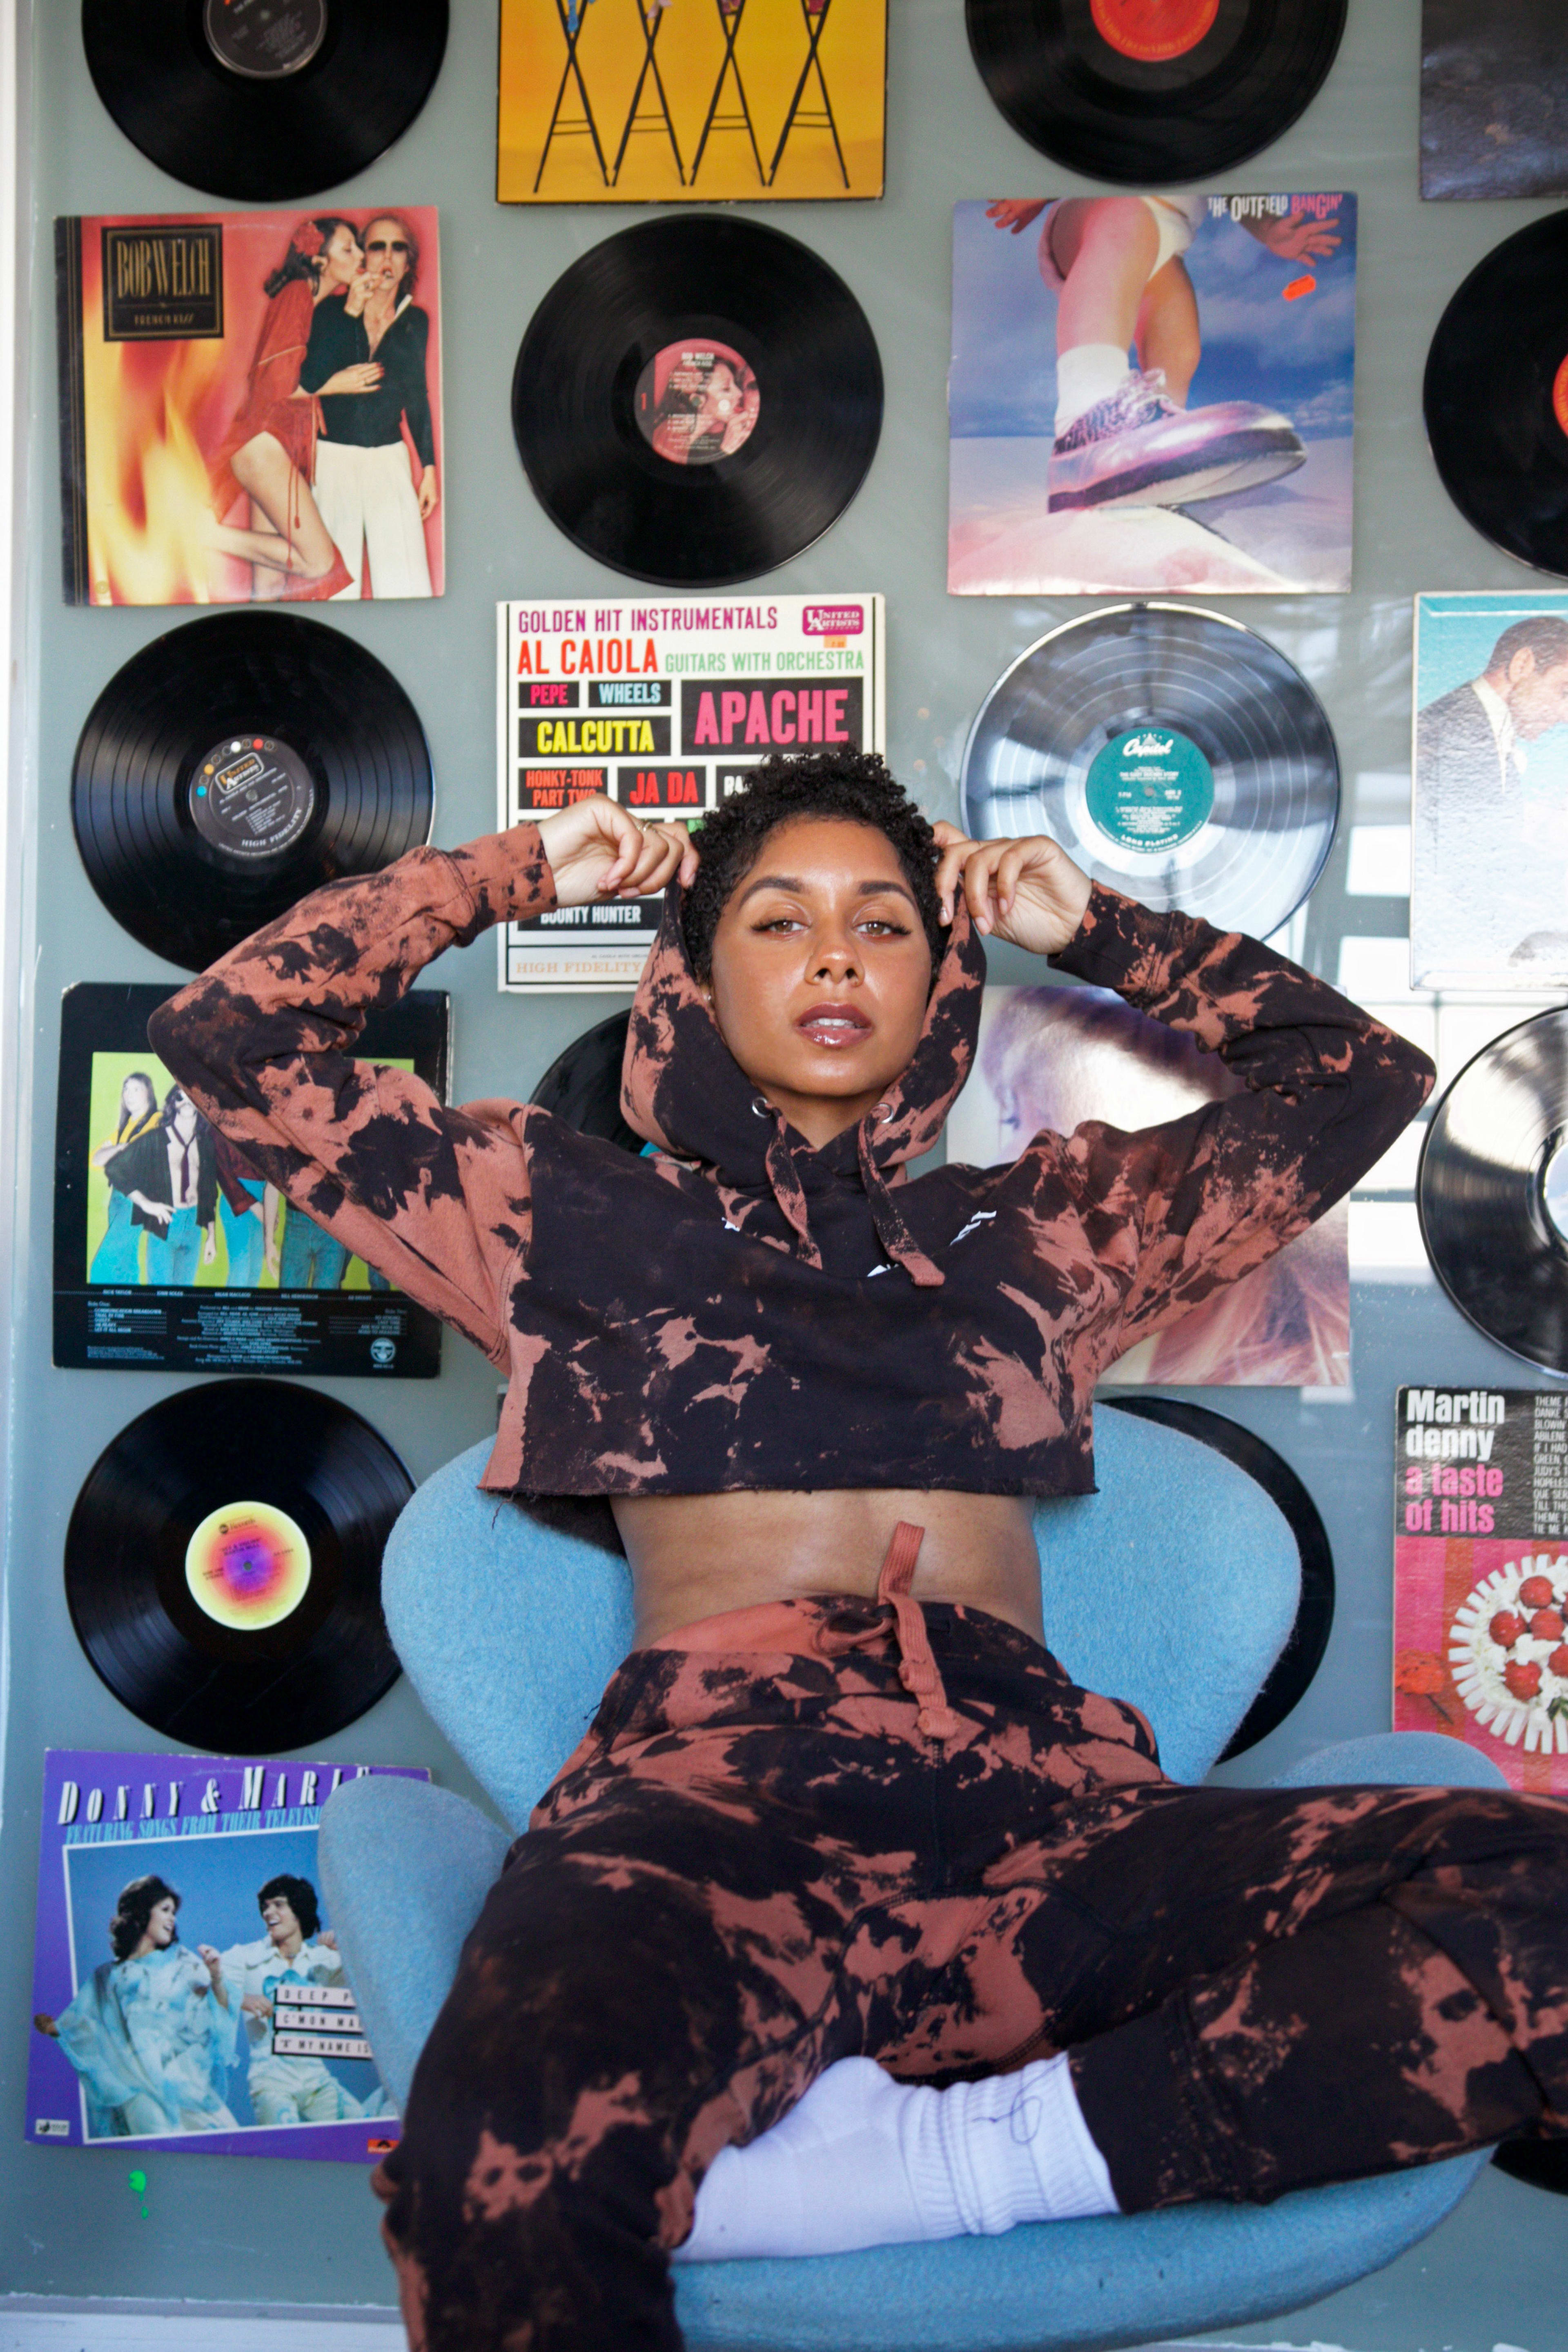 A retro photoshoot of a woman posing on a chair in front of a wall of records.